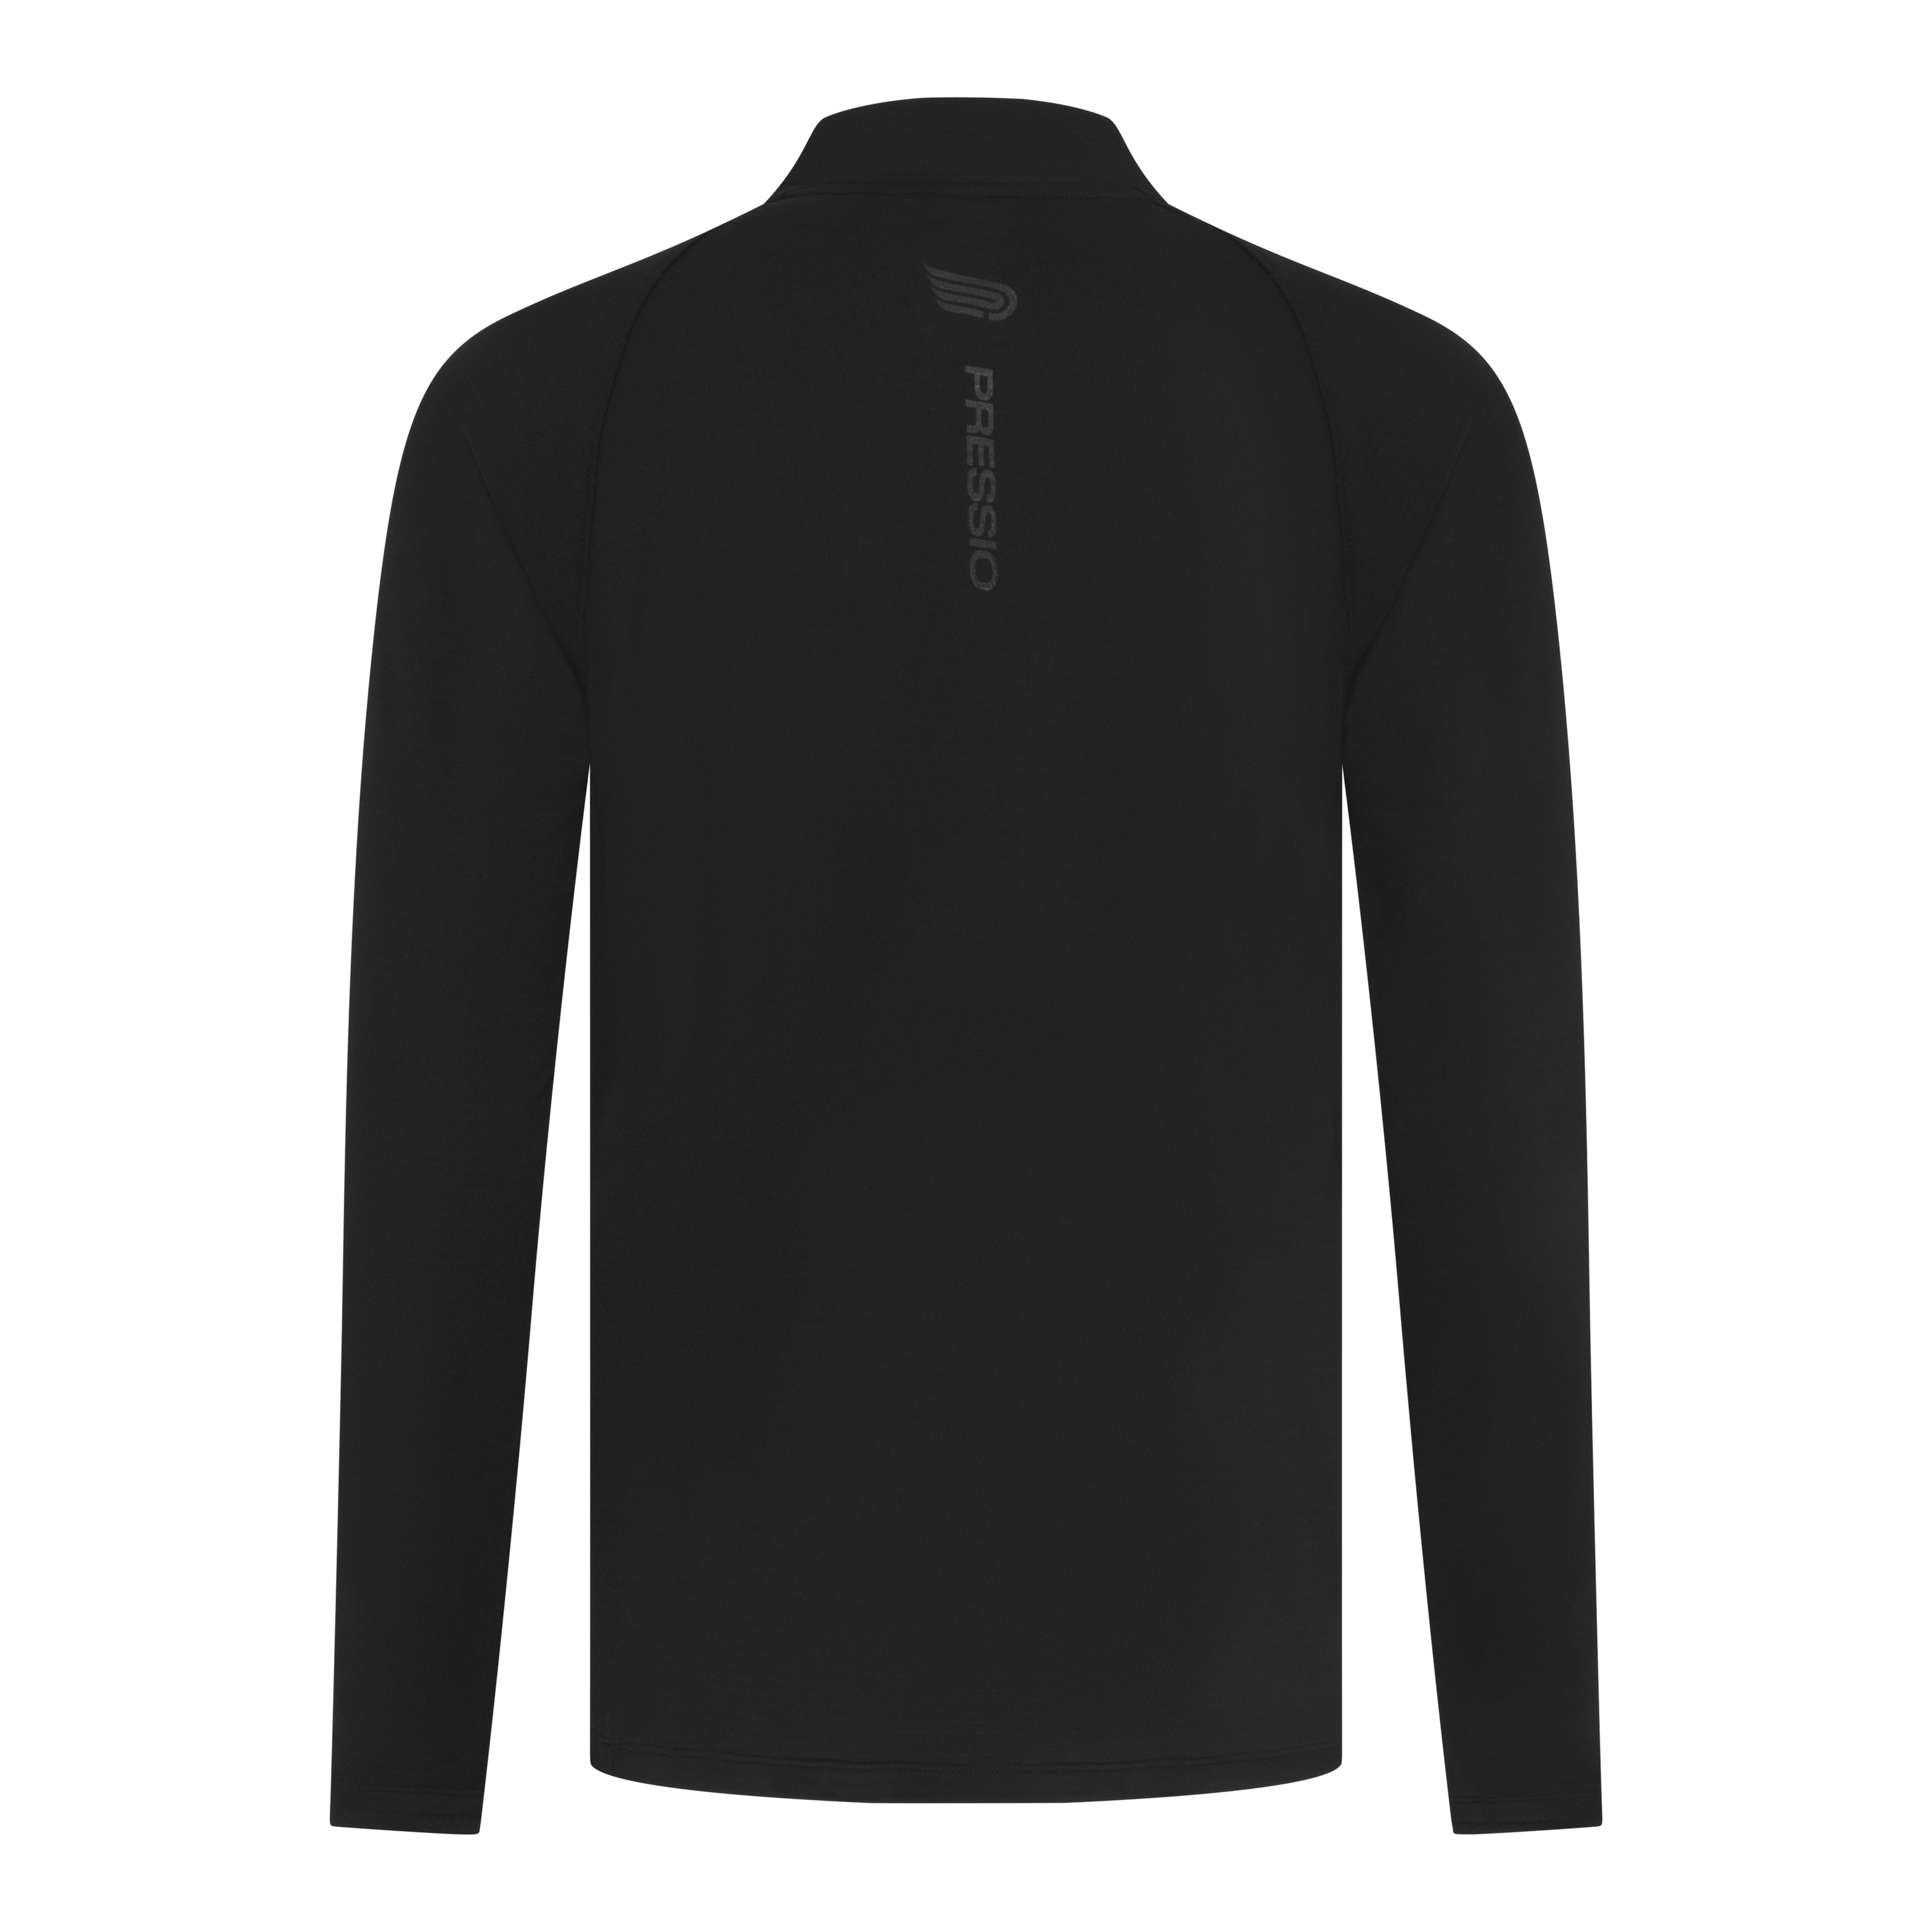 Pressio Perform Thermal 1/4 Zip for Running - Men - Sole Mate